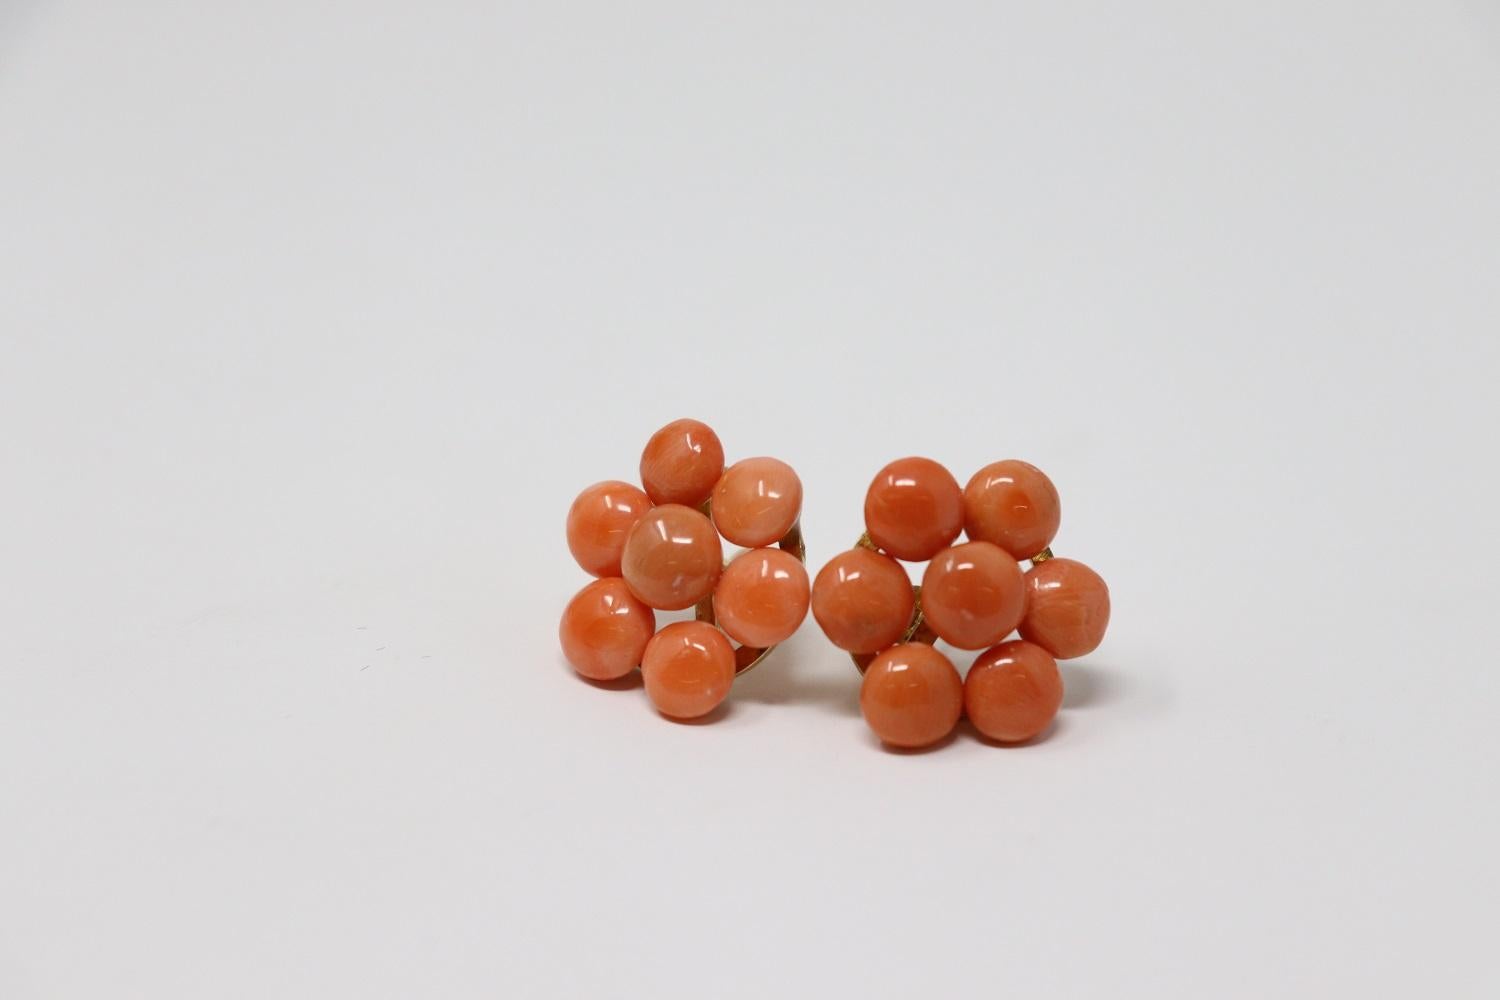 Beautiful elegant stud earrings. The earrings consists of 18 kt yellow gold with precious Italian coral of Sciacca city of Sicily. Beautiful earrings made by Italian goldsmiths.
Total weight: 9 grams
Metal: 18Kt yellow gold
New contemporary jewelry.